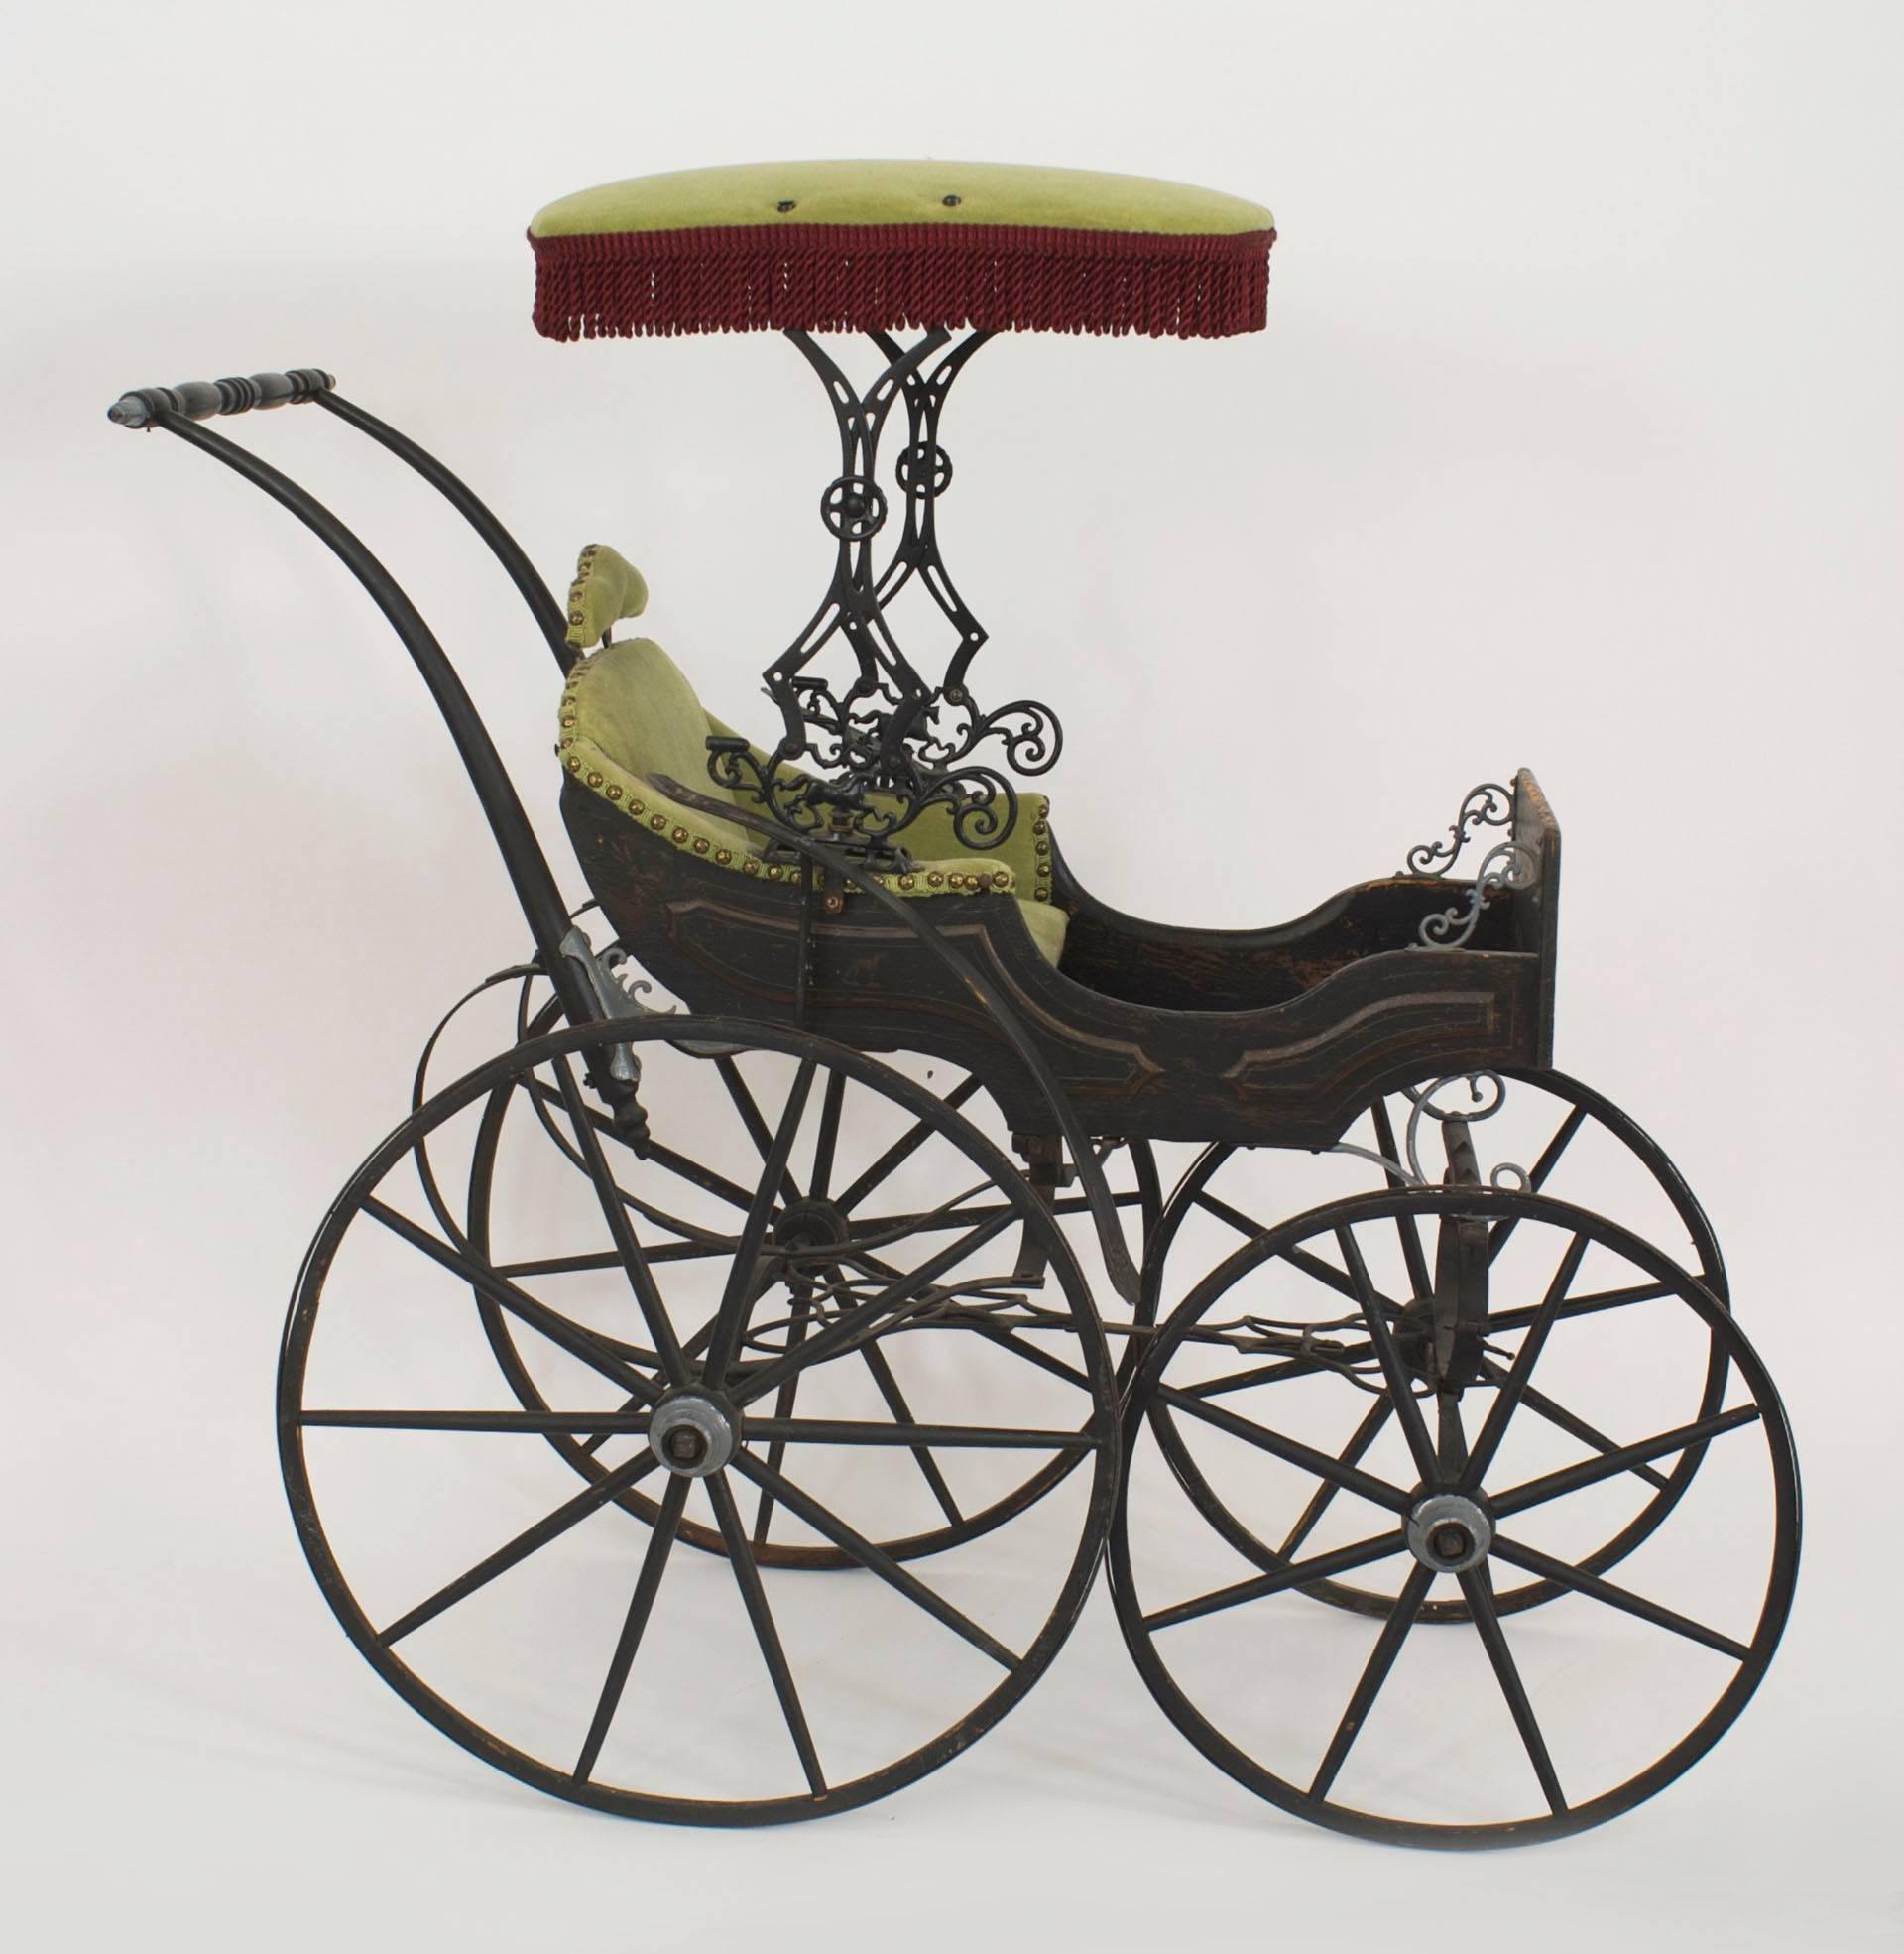 American Victorian iron and wood fancy baby carriage with green velvet upholstery and canopy.
